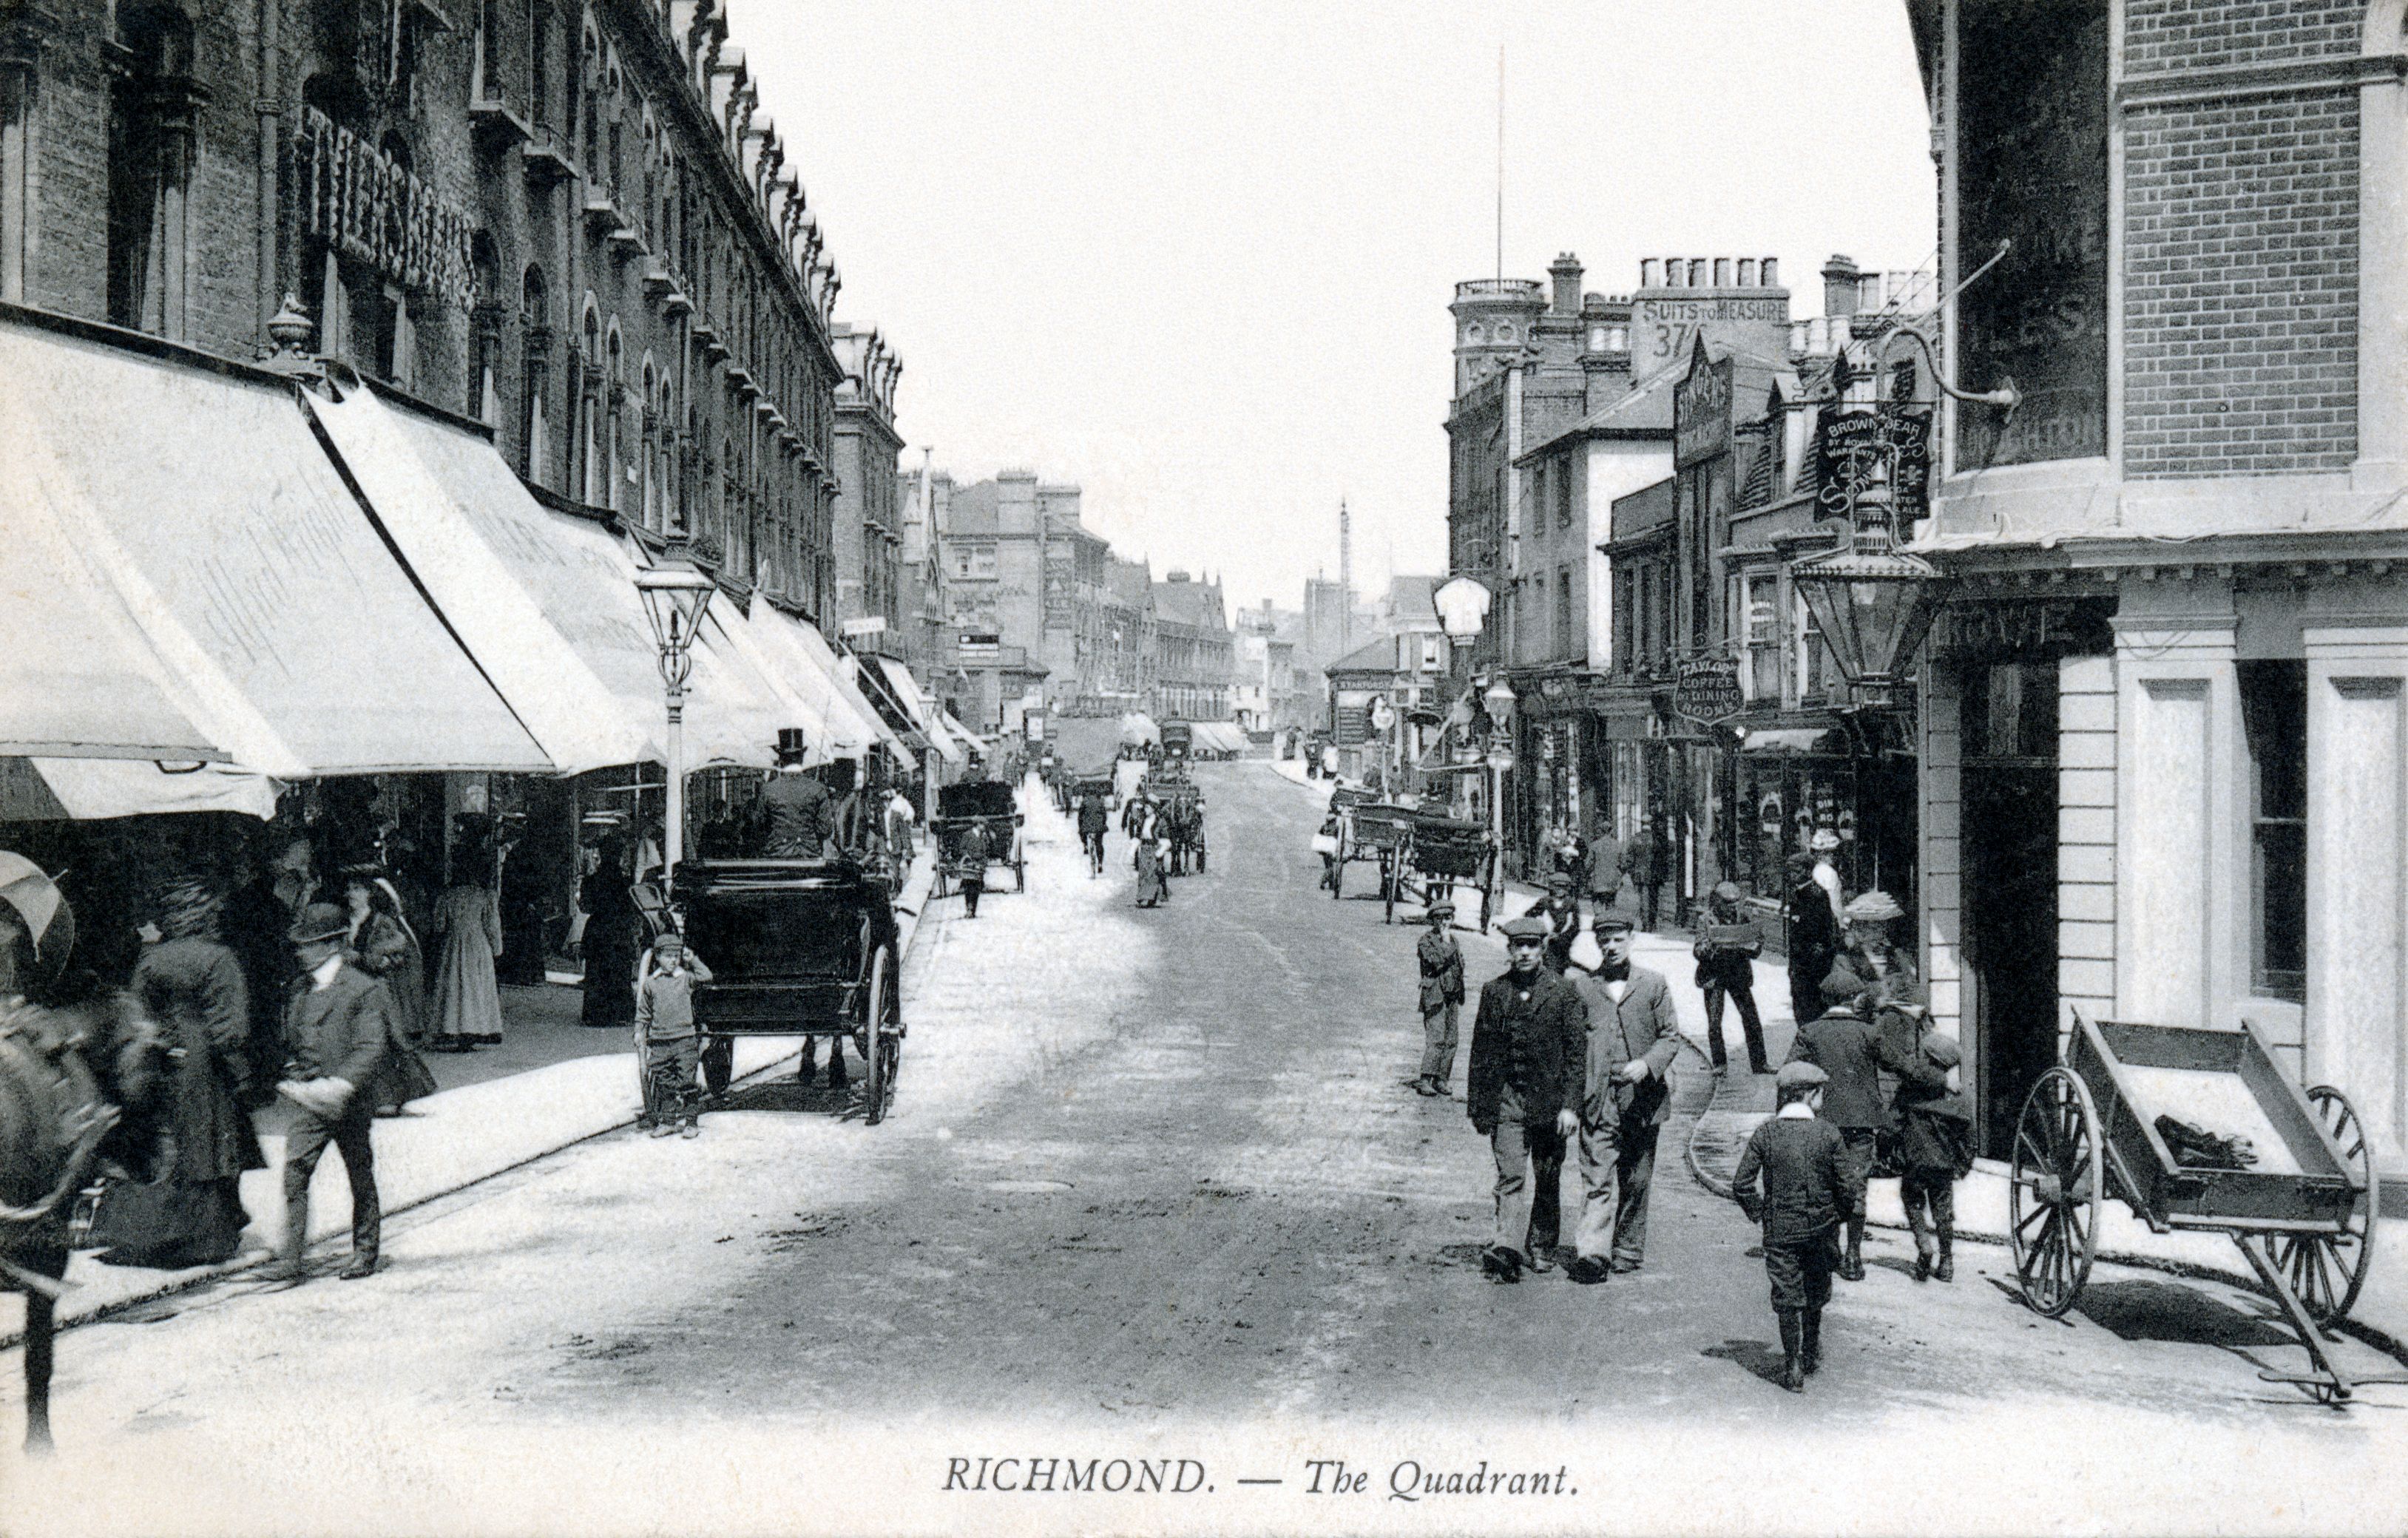 Richmond The Quadrant towards station,hotels and inns Brown Bear,street-townscape